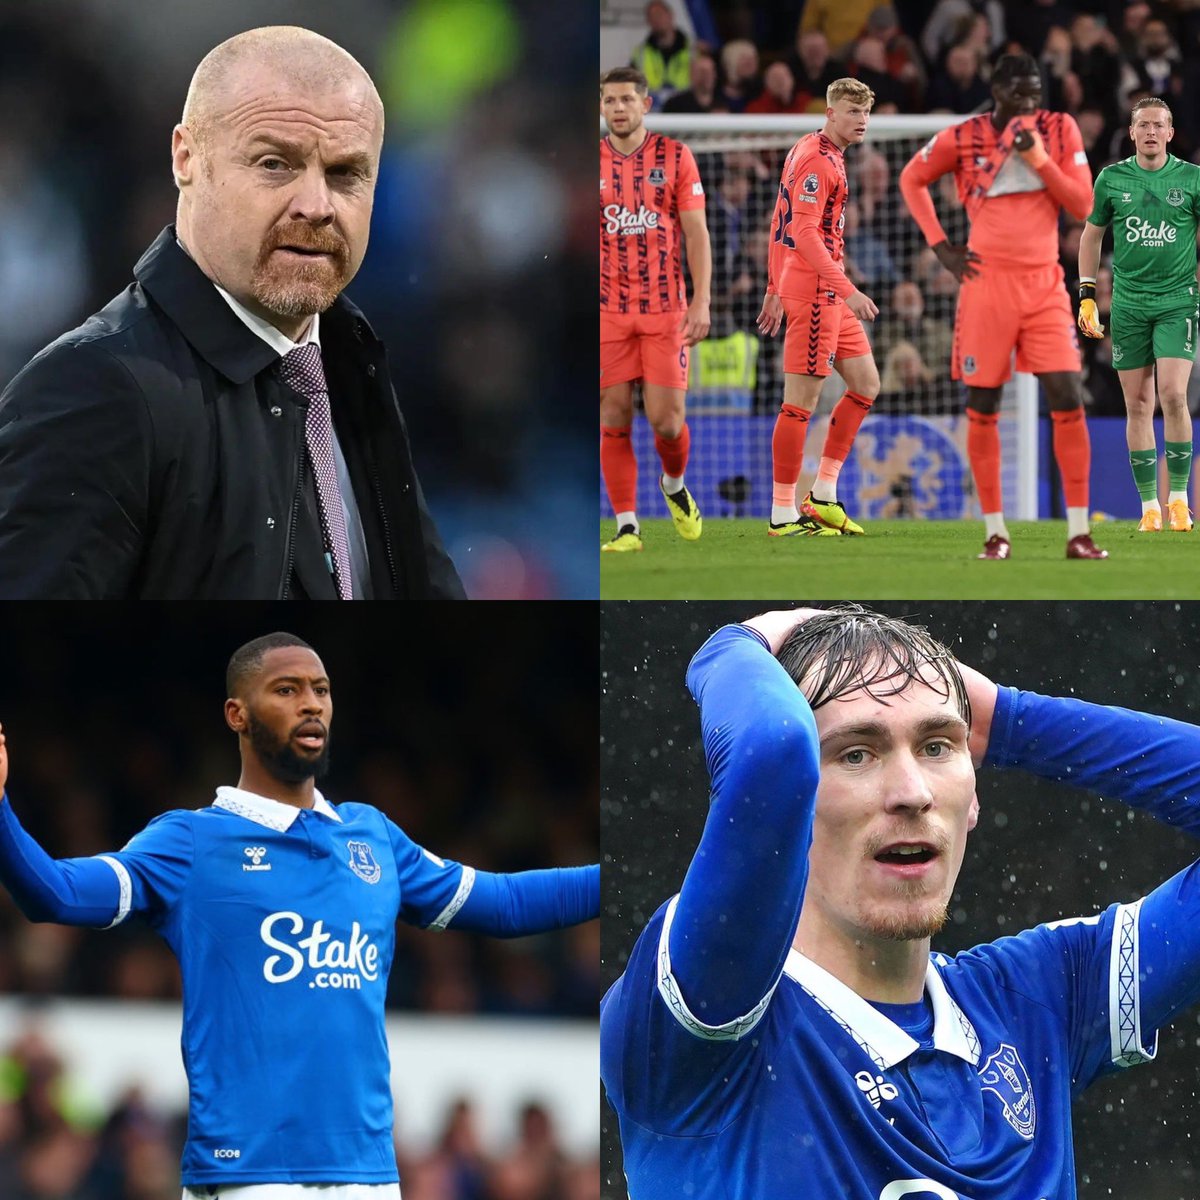 LISTEN: Weekly - Have we got the bottle? @daviddownie17 @WD1878 & @paulmcparlan debate who is up for the fight to keep #EFC up & Sean Dyche’s approach with 6 games to go. Apple: tinyurl.com/2a3zweup Spotify: tinyurl.com/5ajc4pv6 Wherever you get your pods.